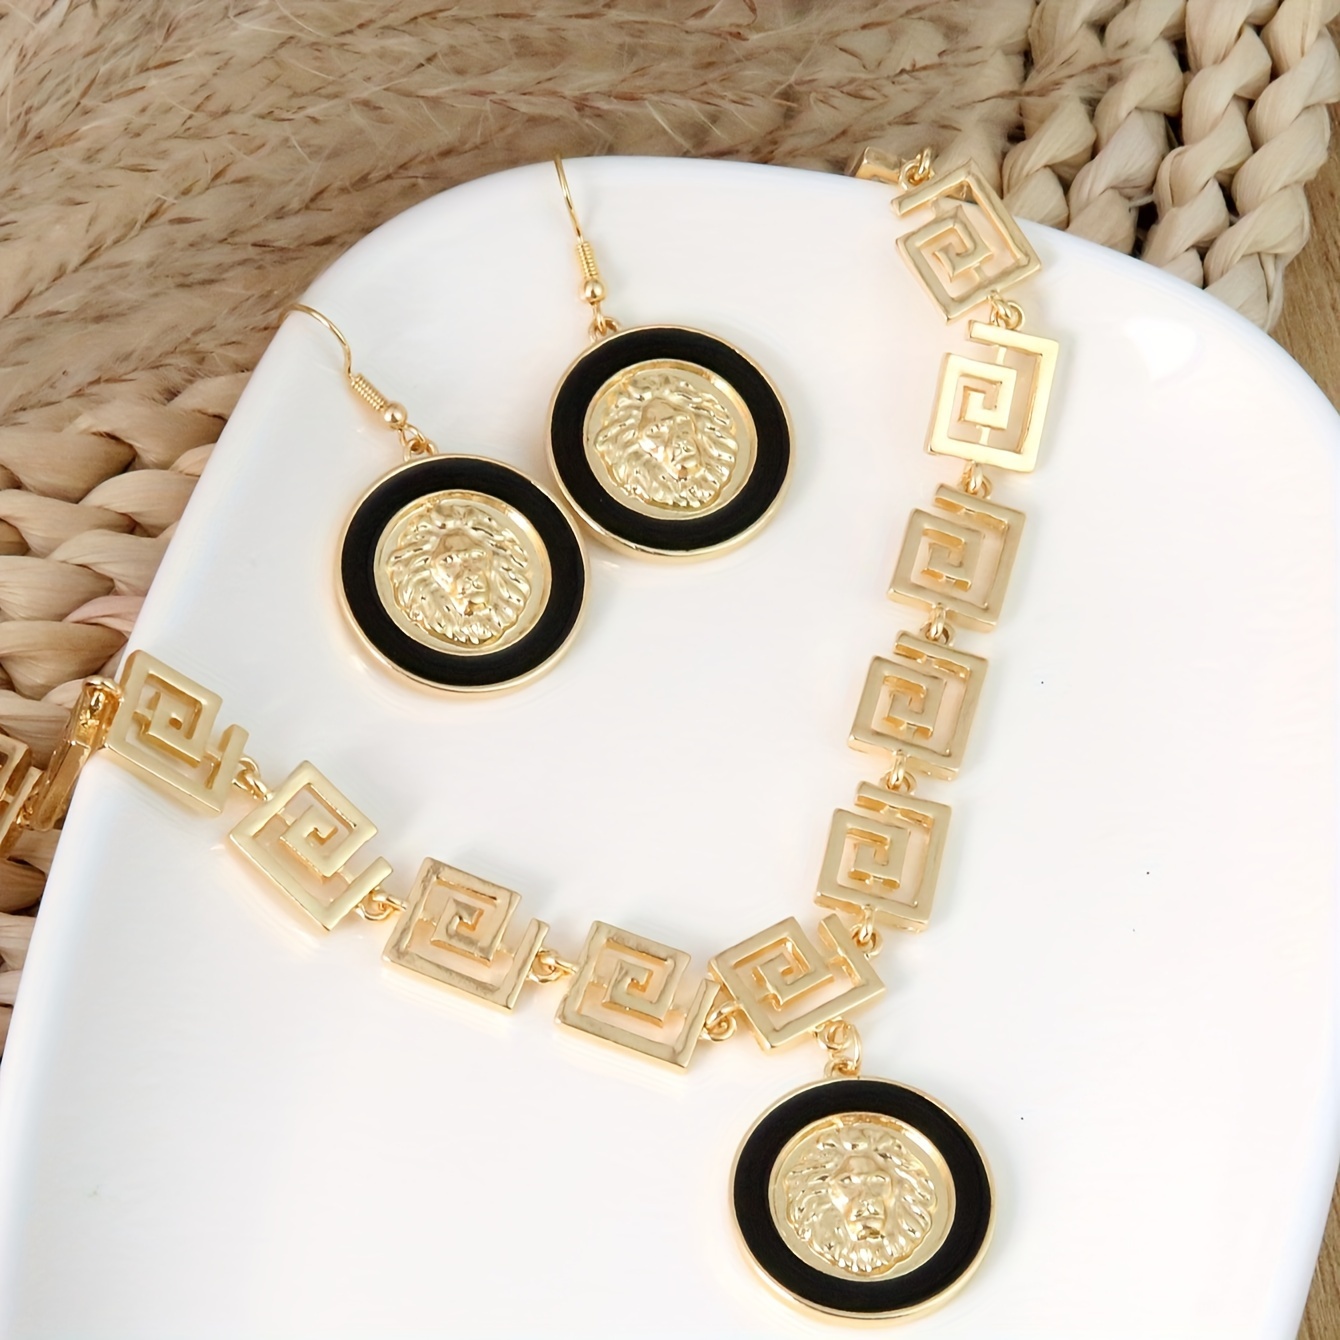 

Elegant Vintage-inspired 1 Set Women's Jewelry With Necklace & Earrings, -tone Greek Key Design With Black Accents For Daily Wear